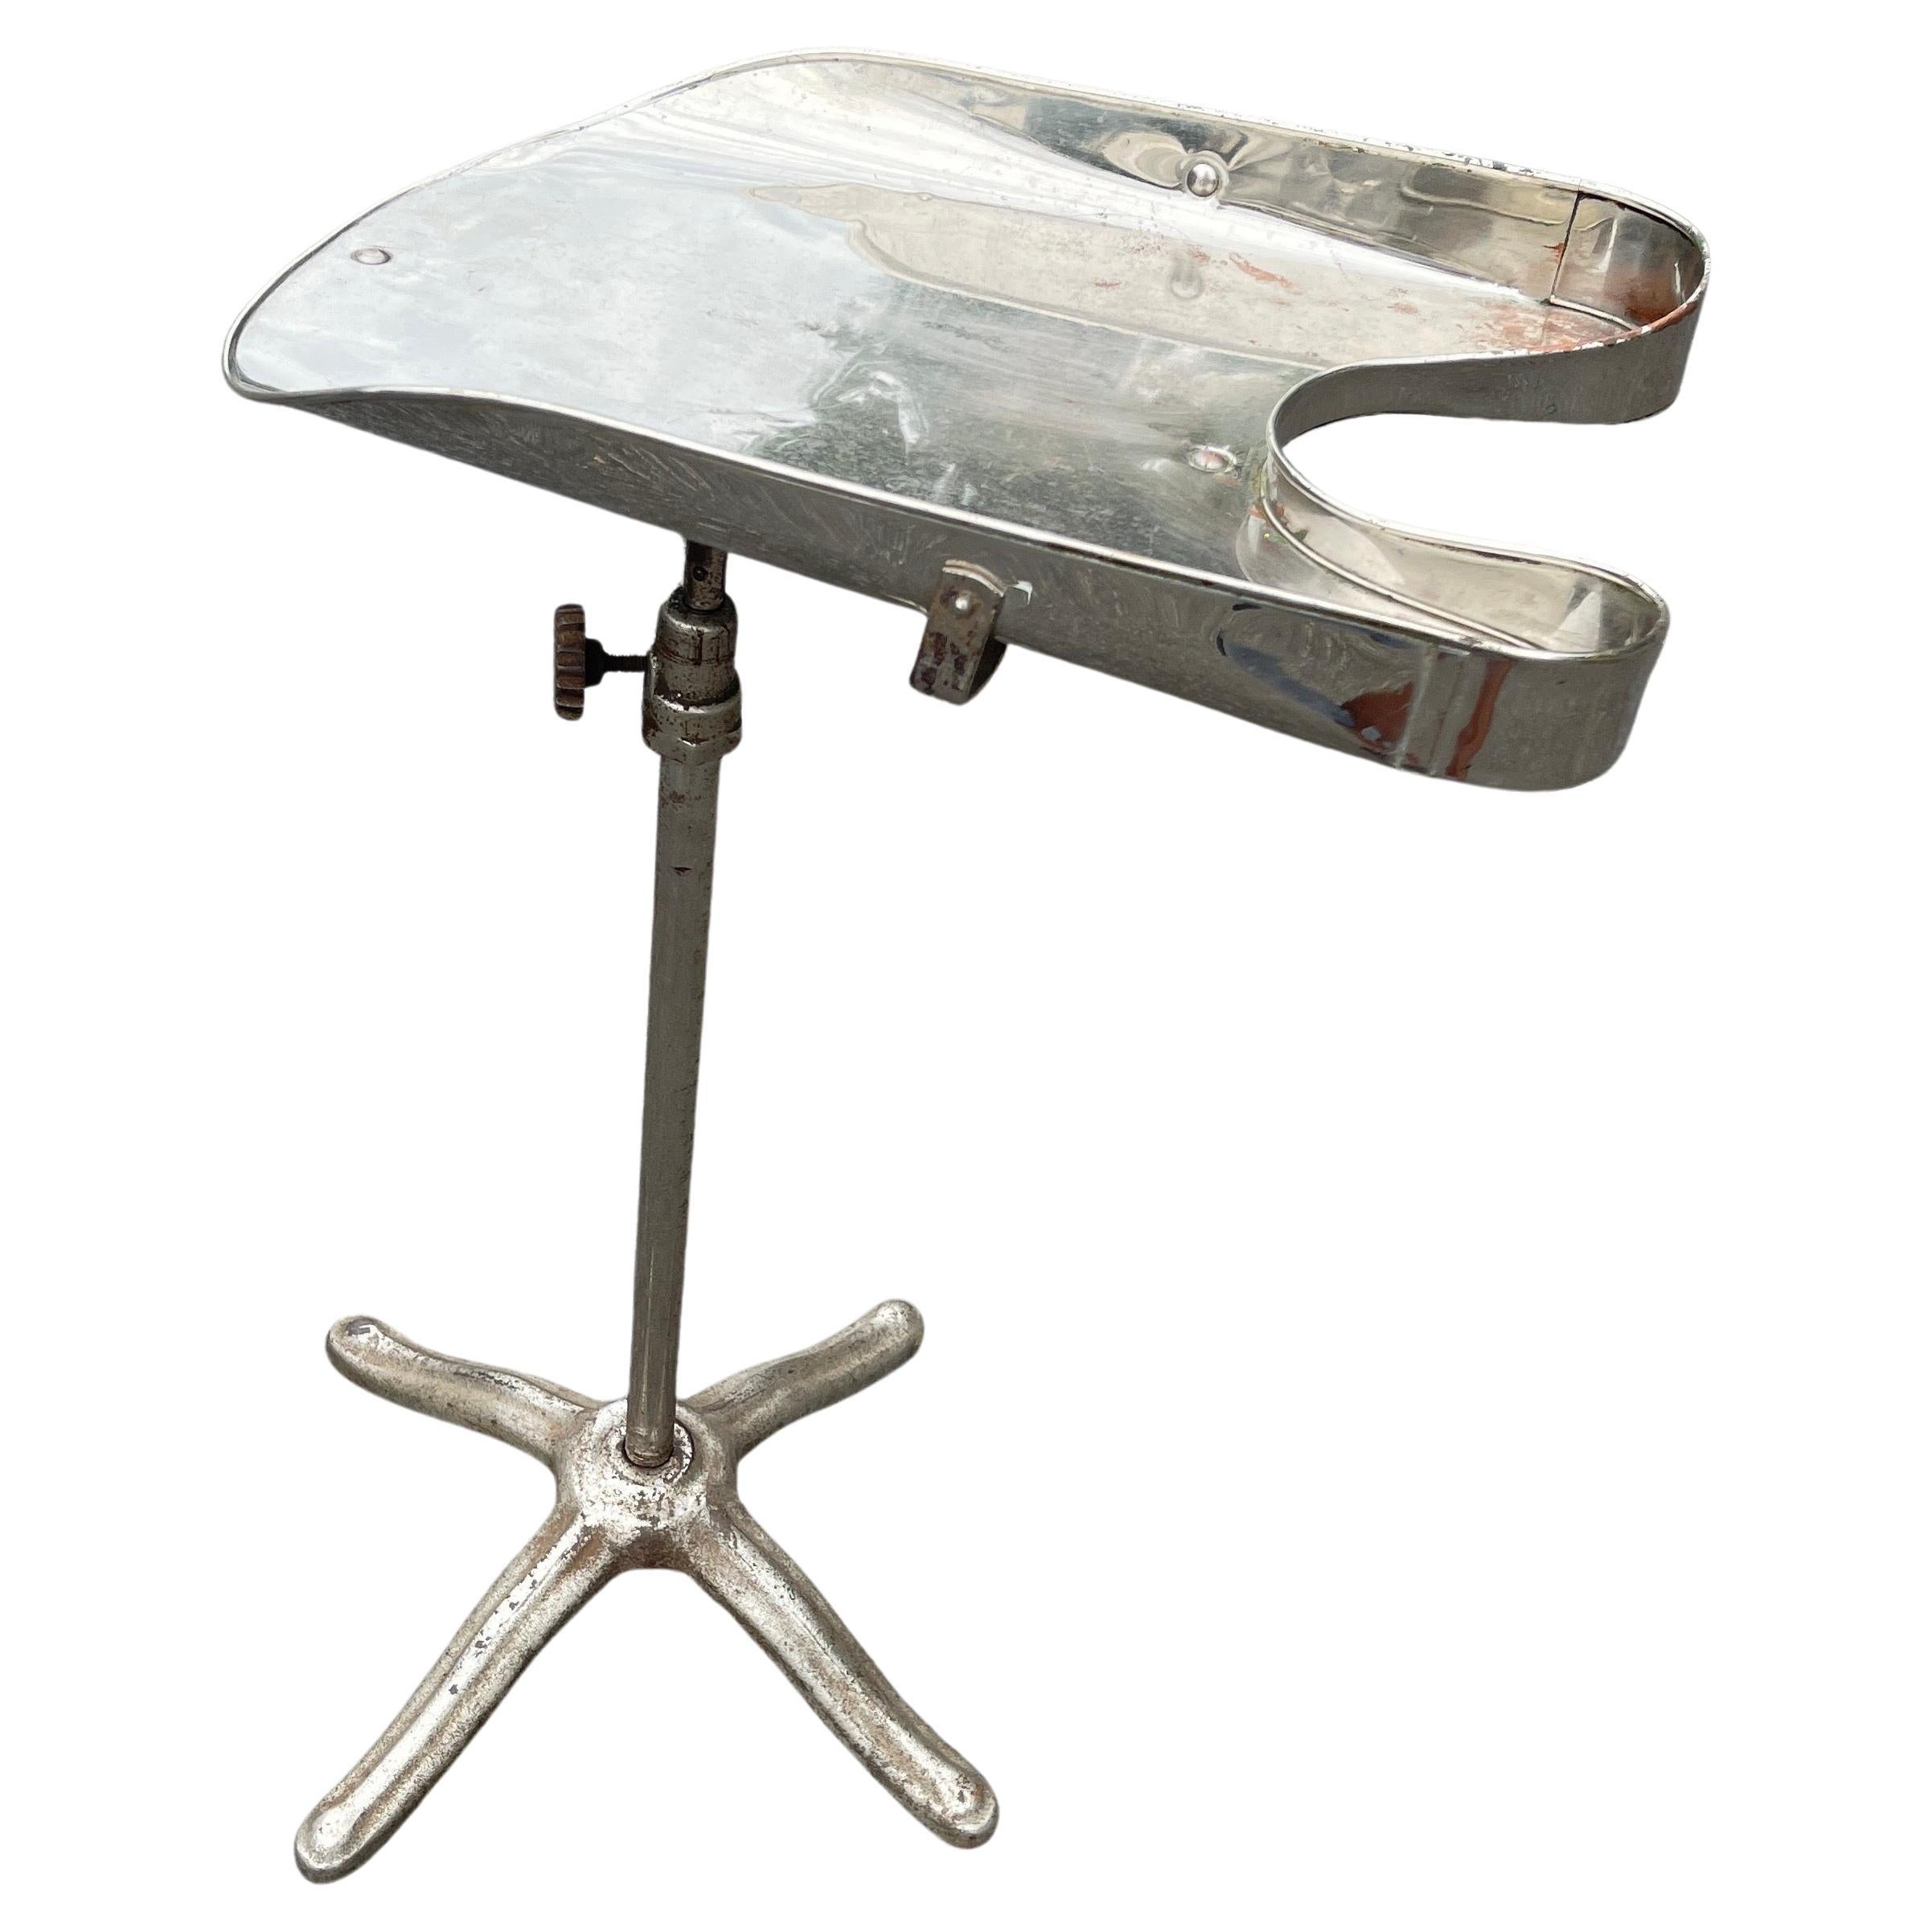 Vintage Industrial Chrome Hair Salon Stand Side Table In Good Condition For Sale In Haddonfield, NJ